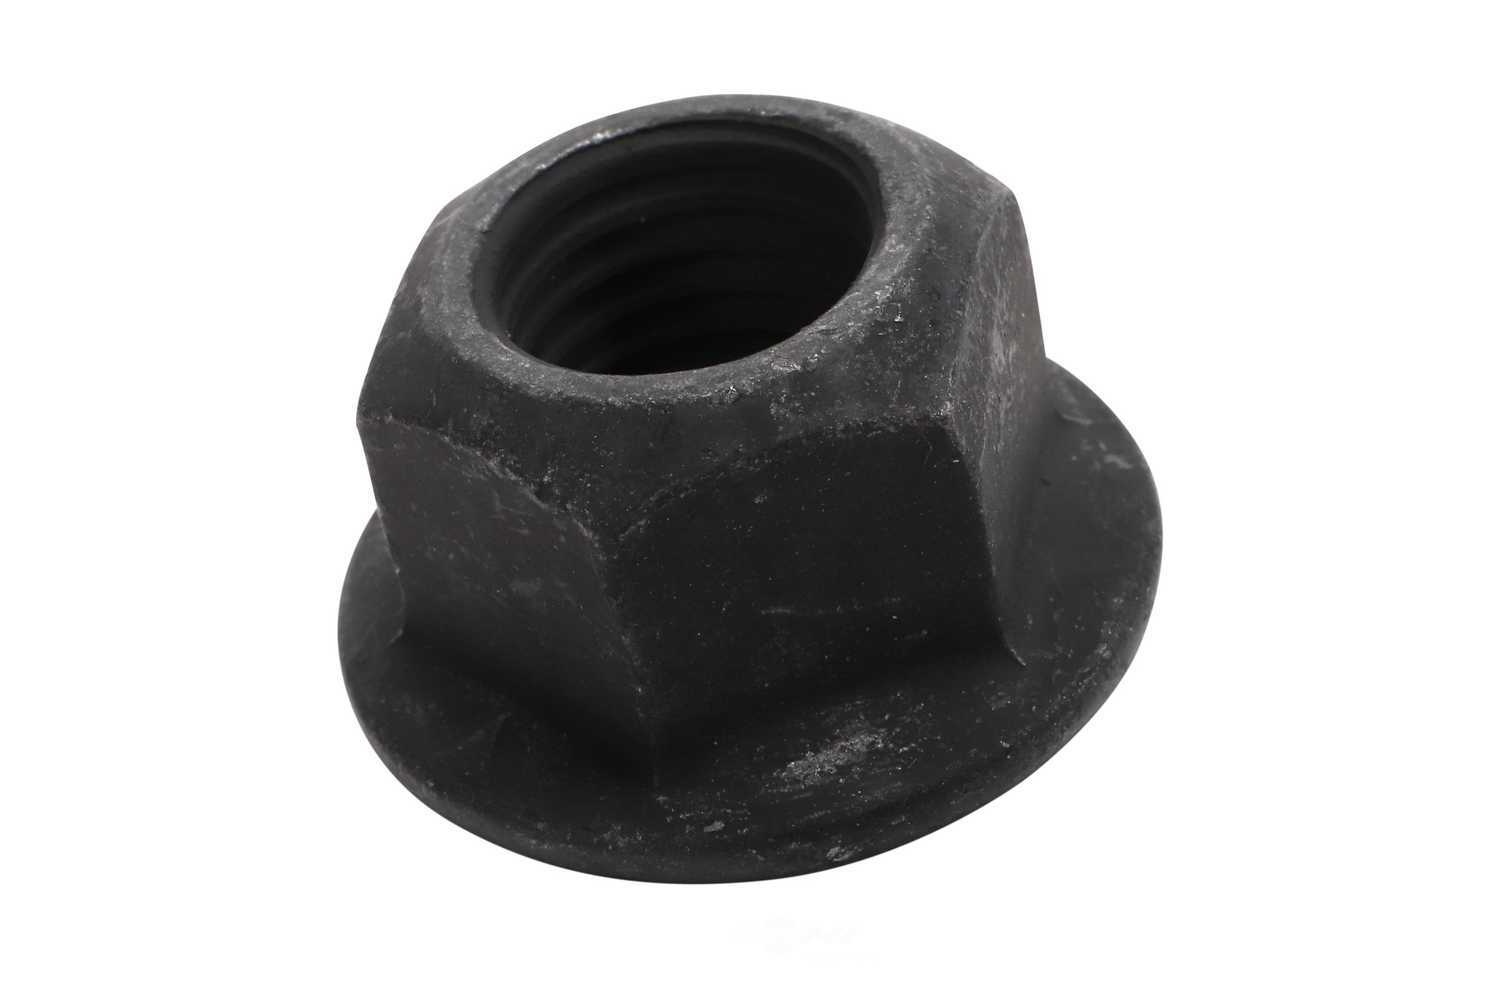 GM GENUINE PARTS - Steering Knuckle Nut - GMP 11546369